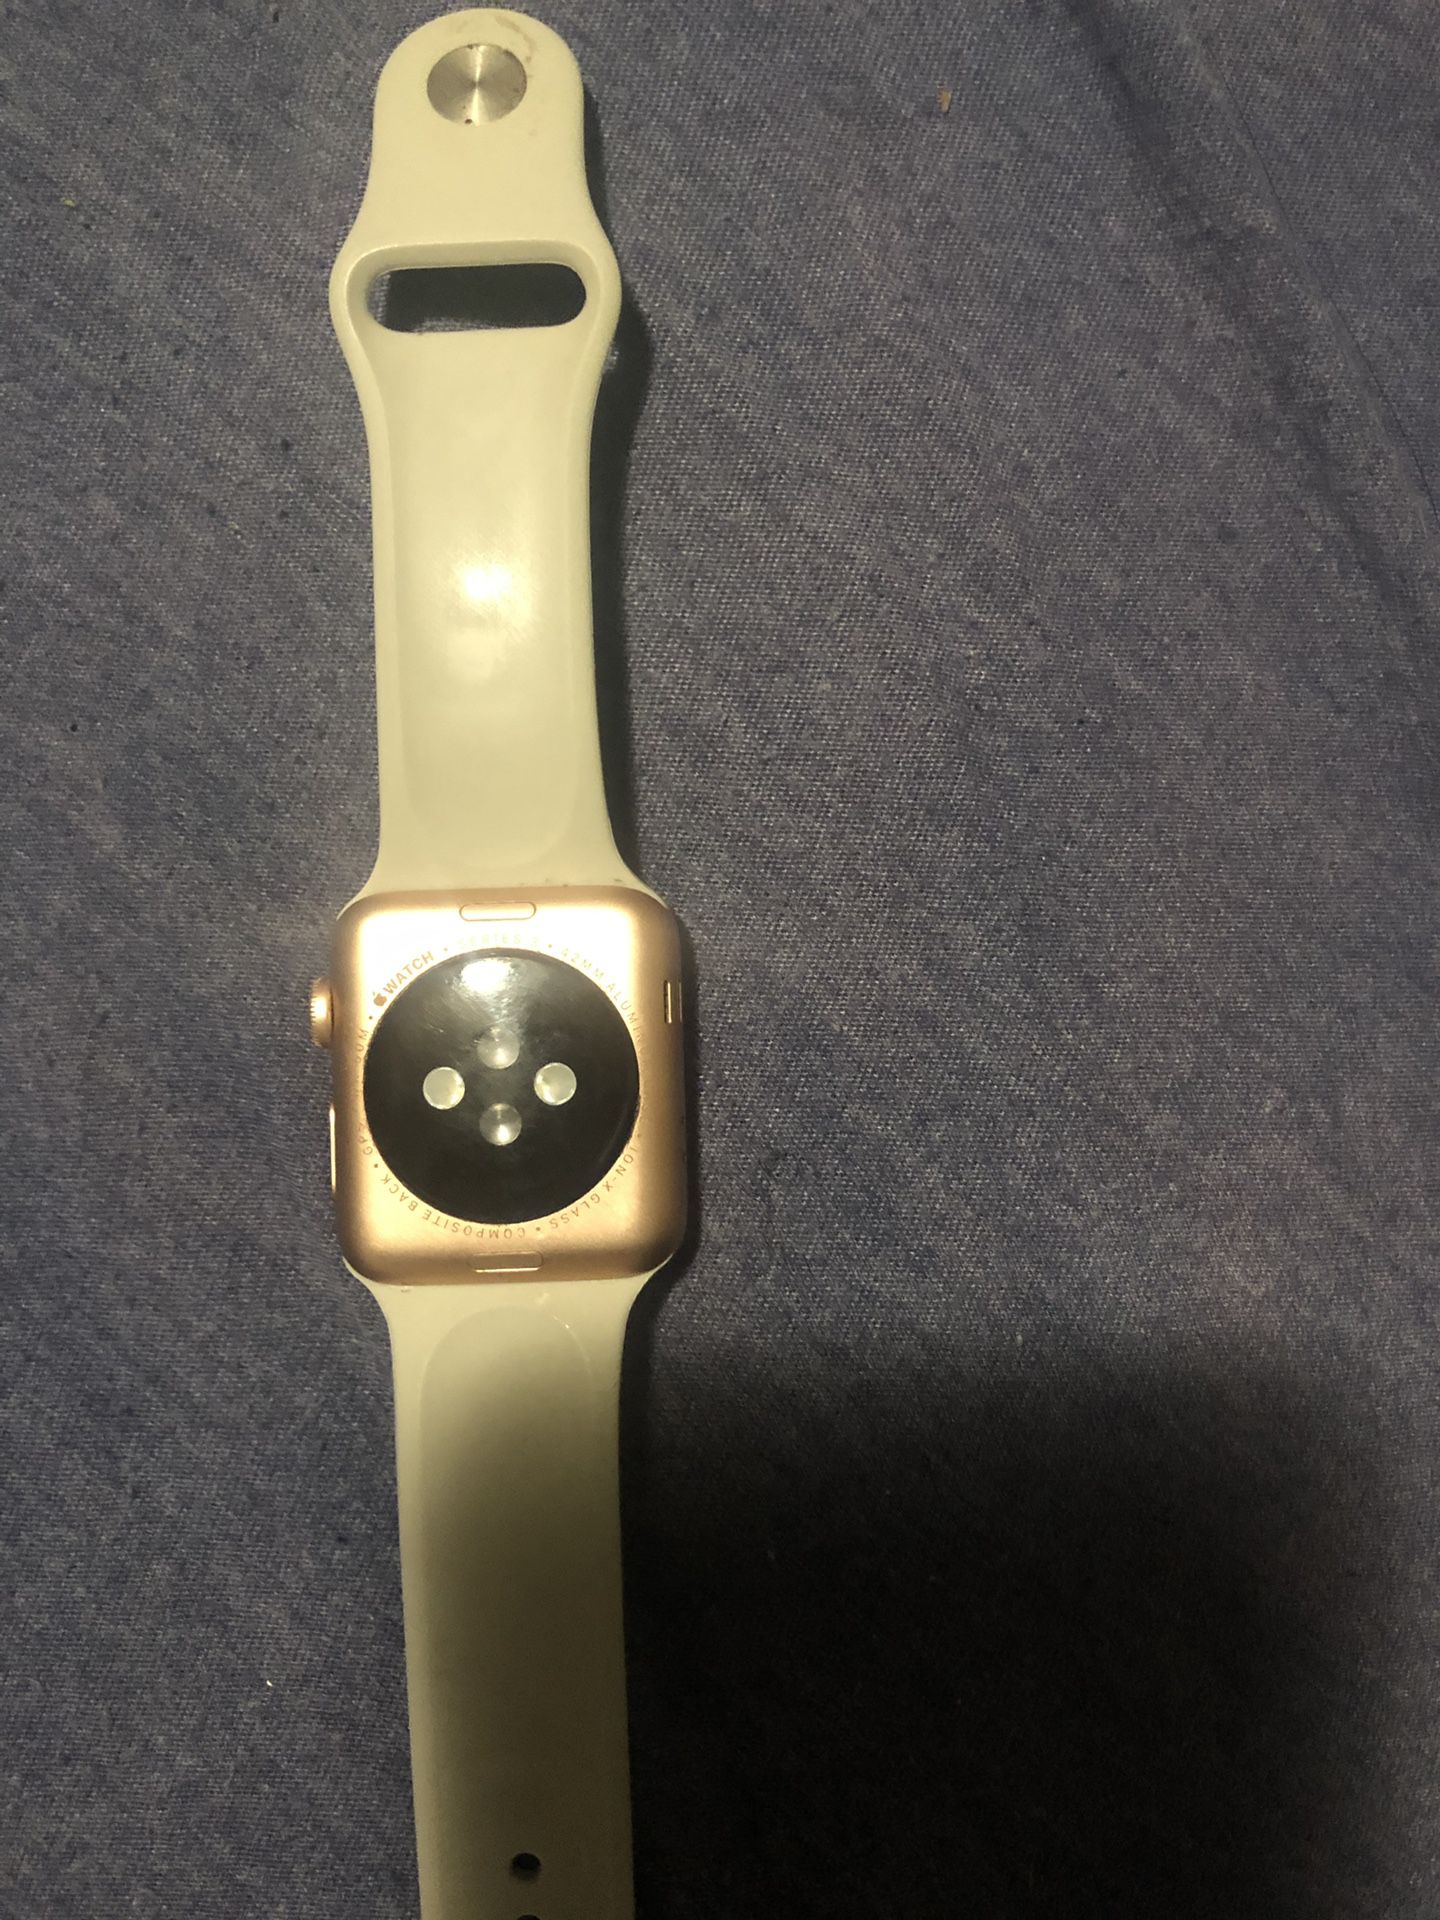 Apple Watch series 3 comes with Charger as well